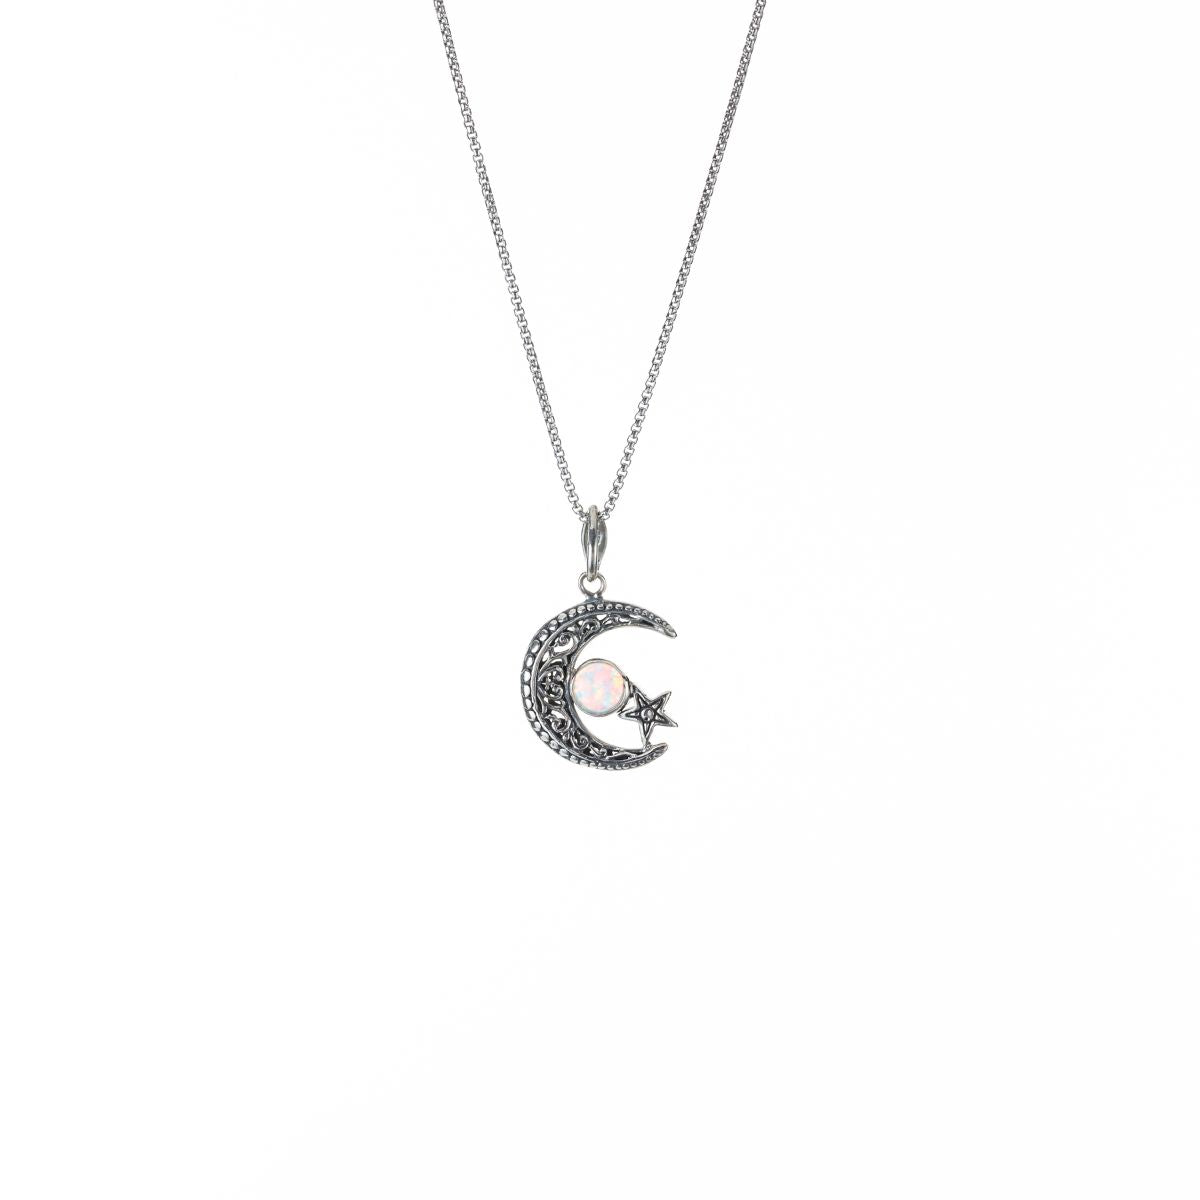 Silver Crescent Moon and Star Pendant Necklace with Opal